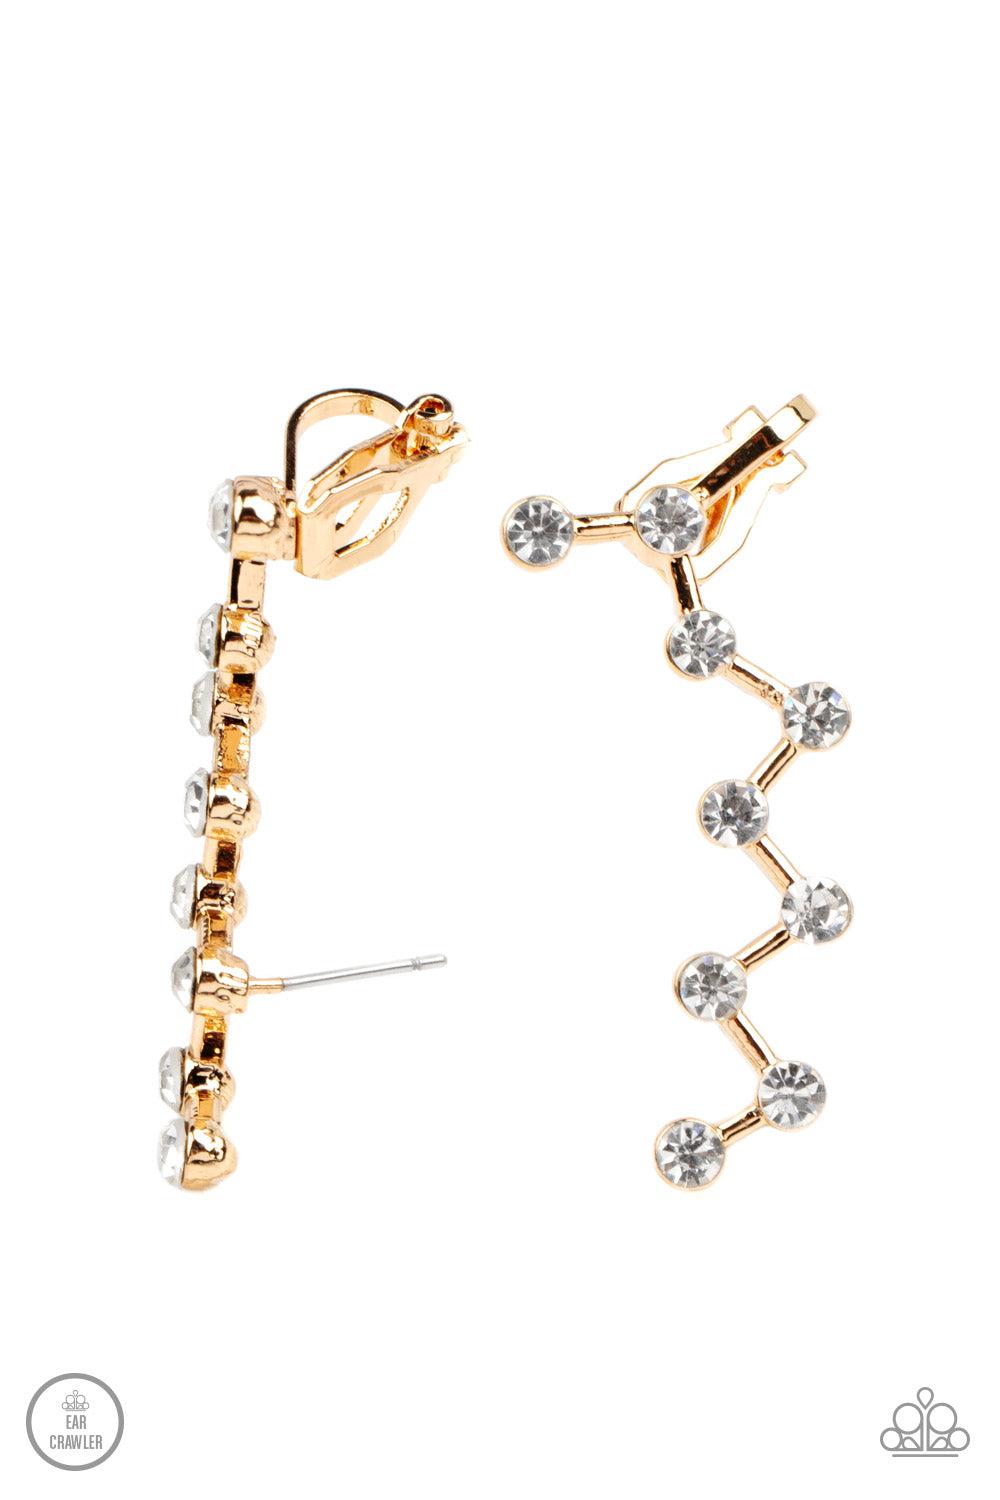 Clamoring Constellations Gold Ear Crawler Earrings - Paparazzi Accessories- lightbox - CarasShop.com - $5 Jewelry by Cara Jewels